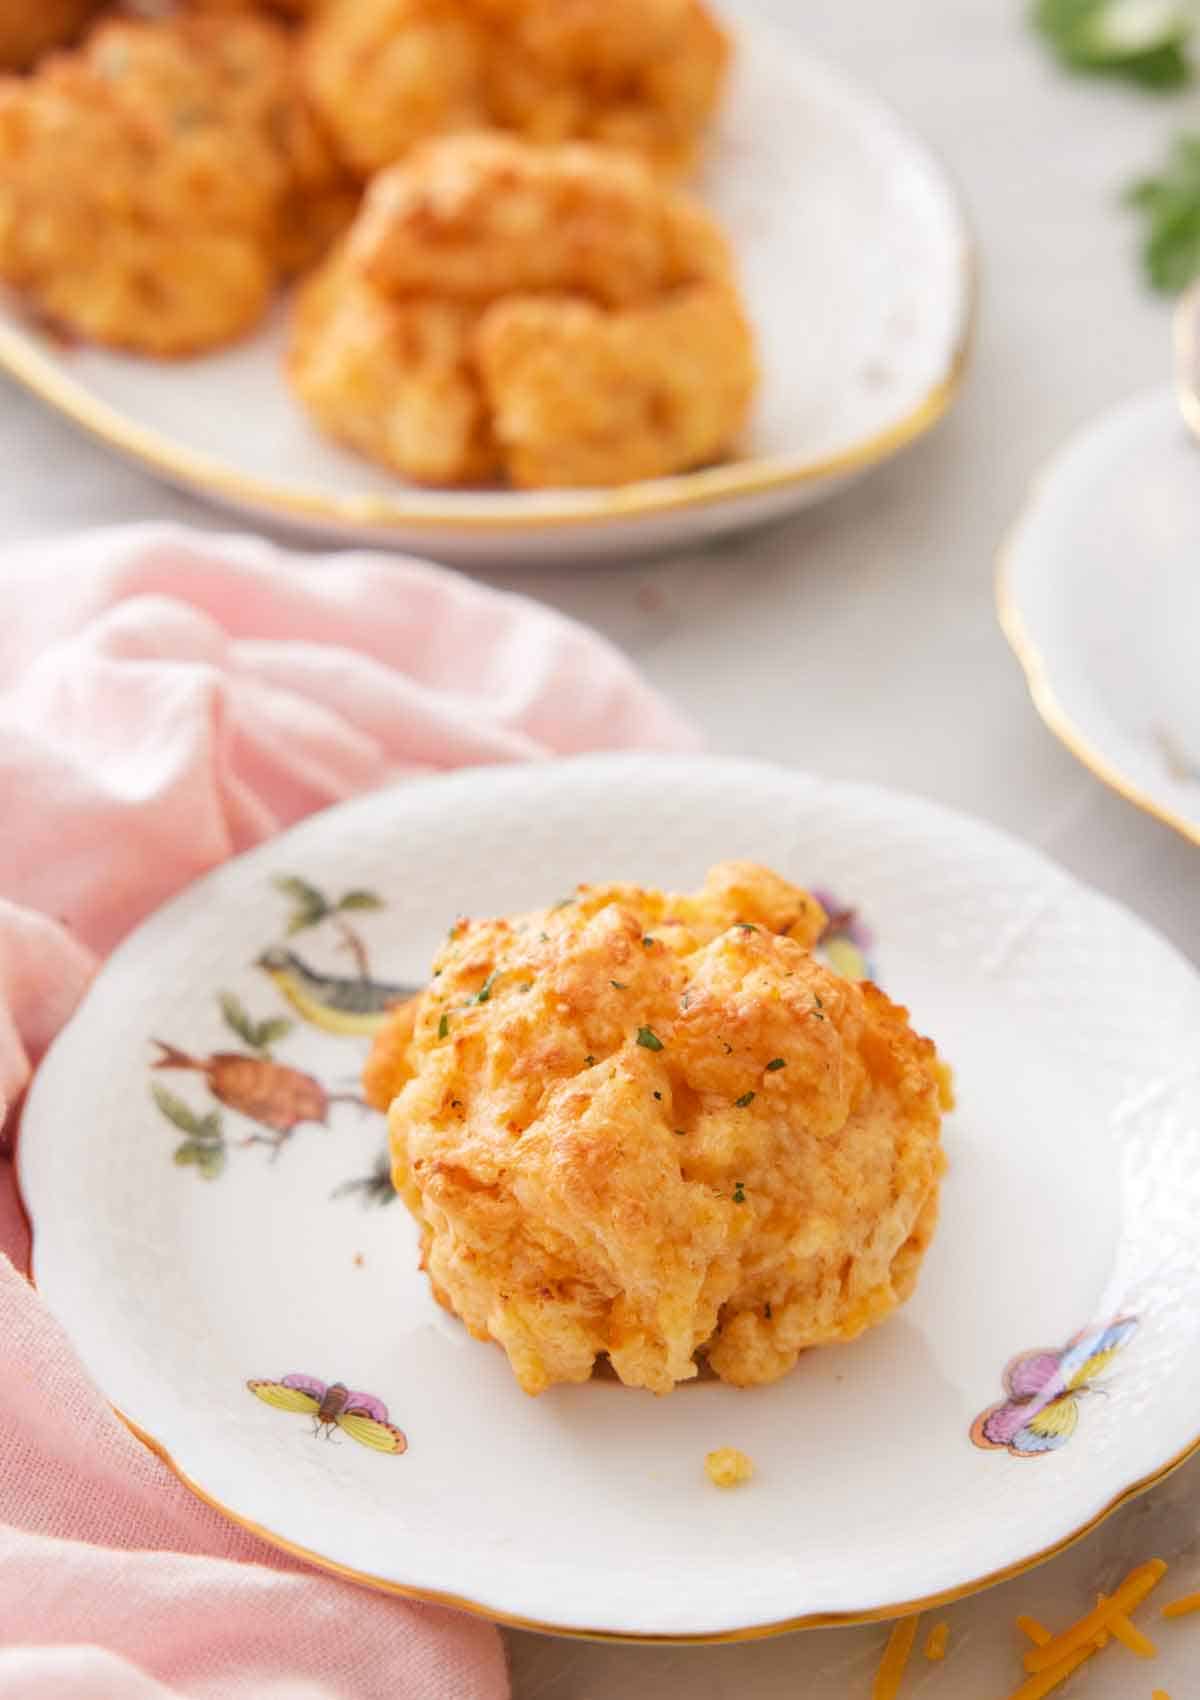 A plate with a cheddar biscuit on it with more in a platter in the background.